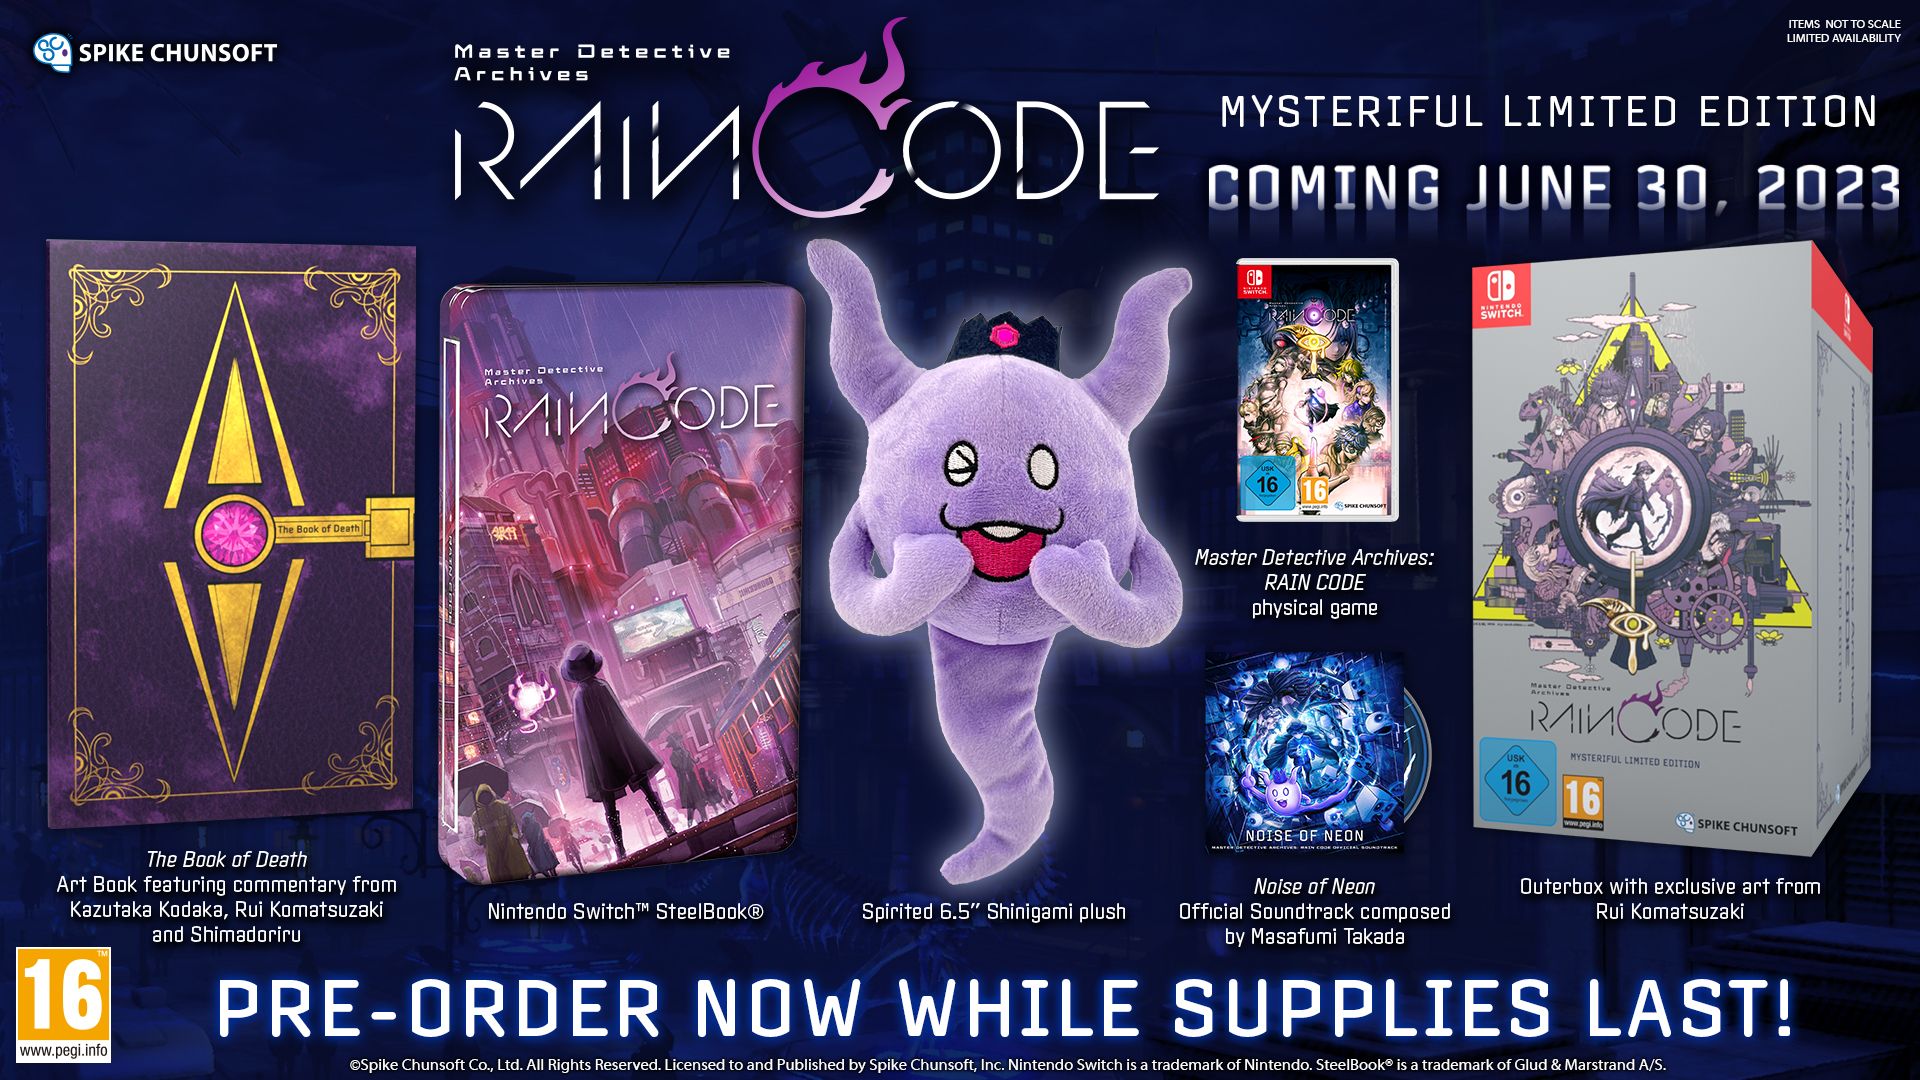 Master Detective Archives: RAIN CODE Mysteriful Limited Edition